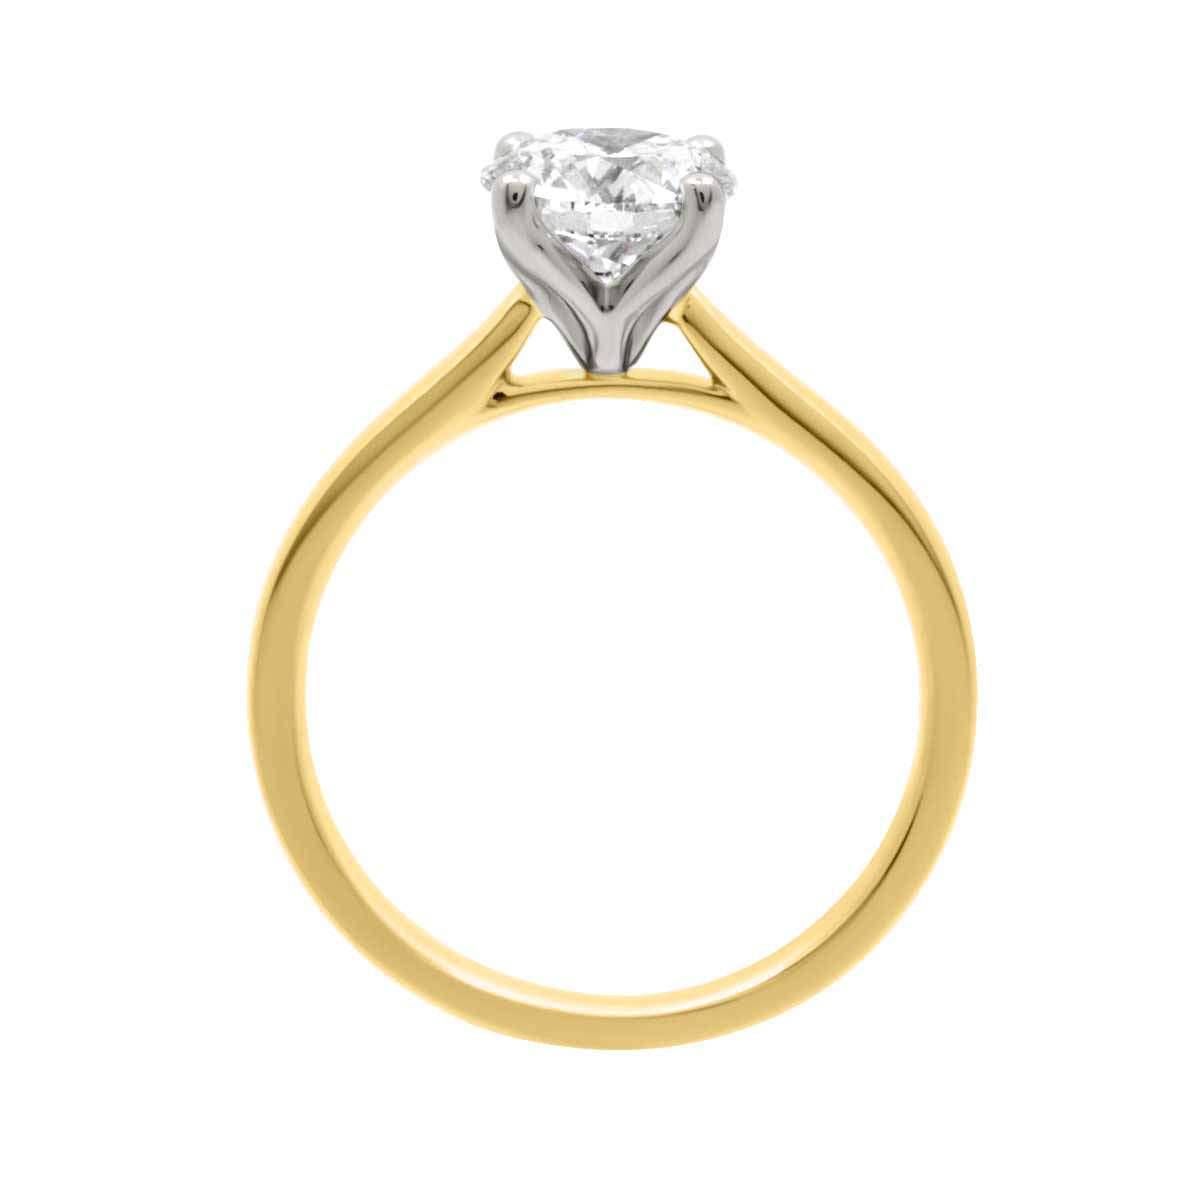 Tulip Setting Solitaire Engagement Ring In White and yellow Gold standing upright